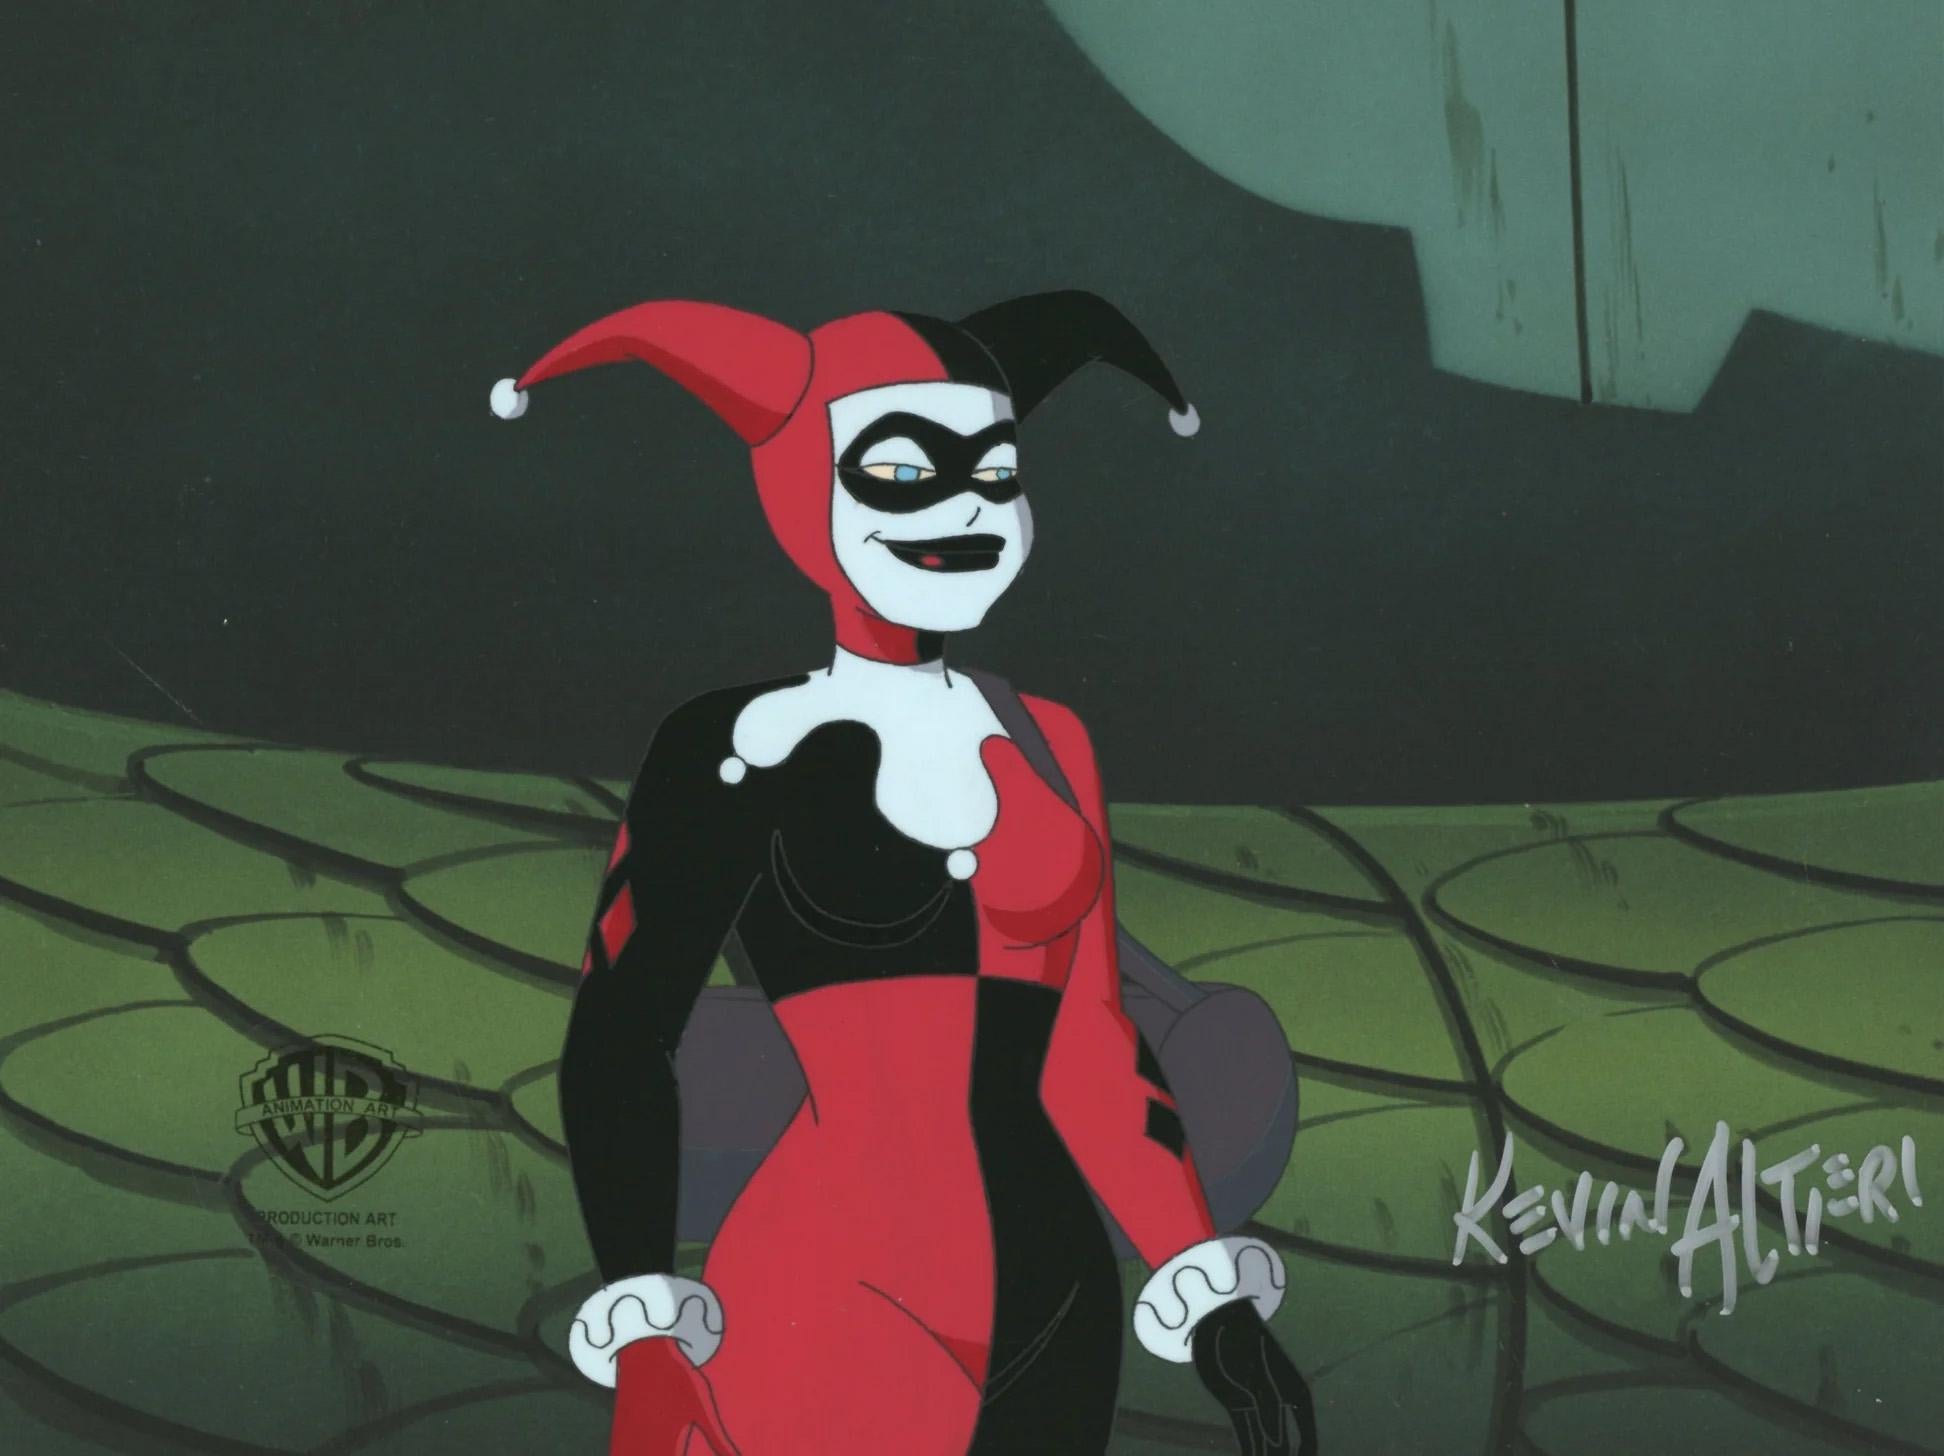 Batman The Animated Series Original Cel Signed By Kevin Altieri: Harley Quinn - Art by DC Comics Studio Artists